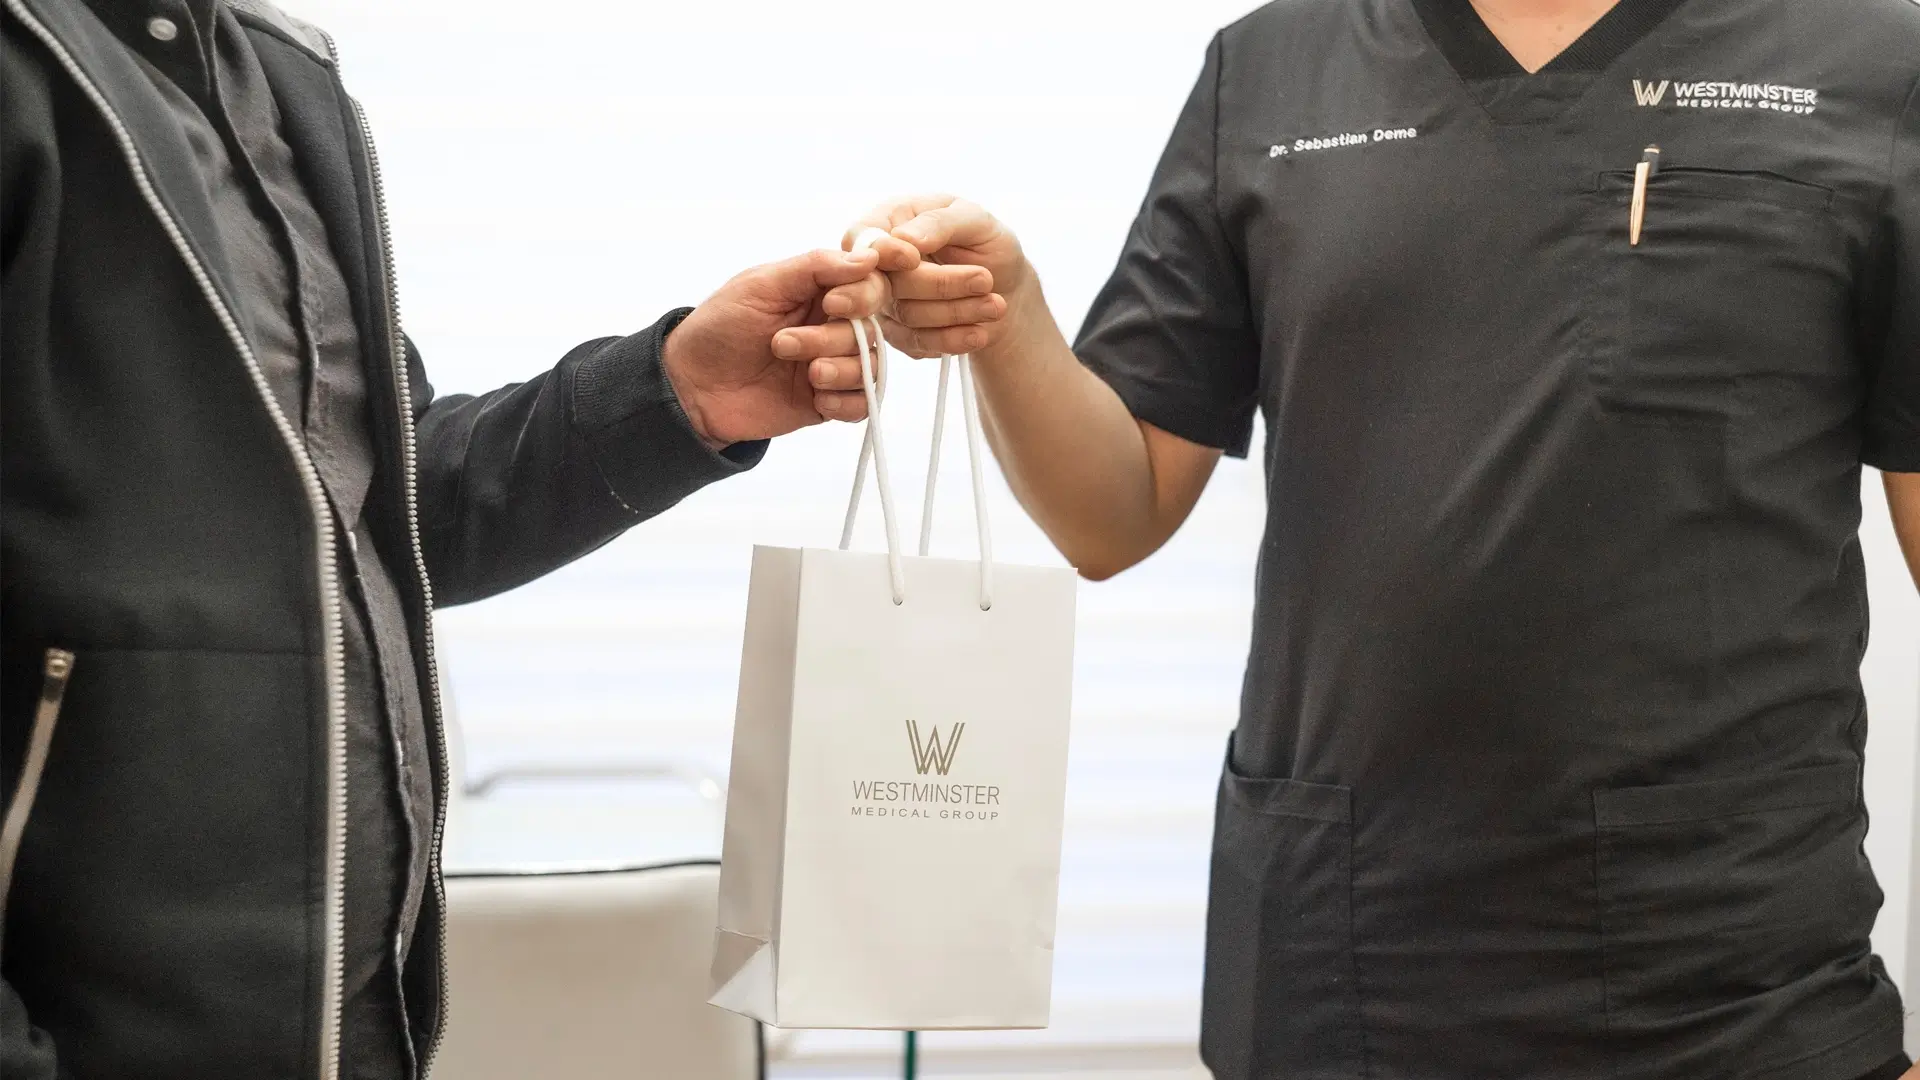 A person in a medical uniform hands a branded Westminster Medical Group bag, specializing in hair replacement, to another person, whose arm is visible. The setting appears professional, possibly within a clinic.